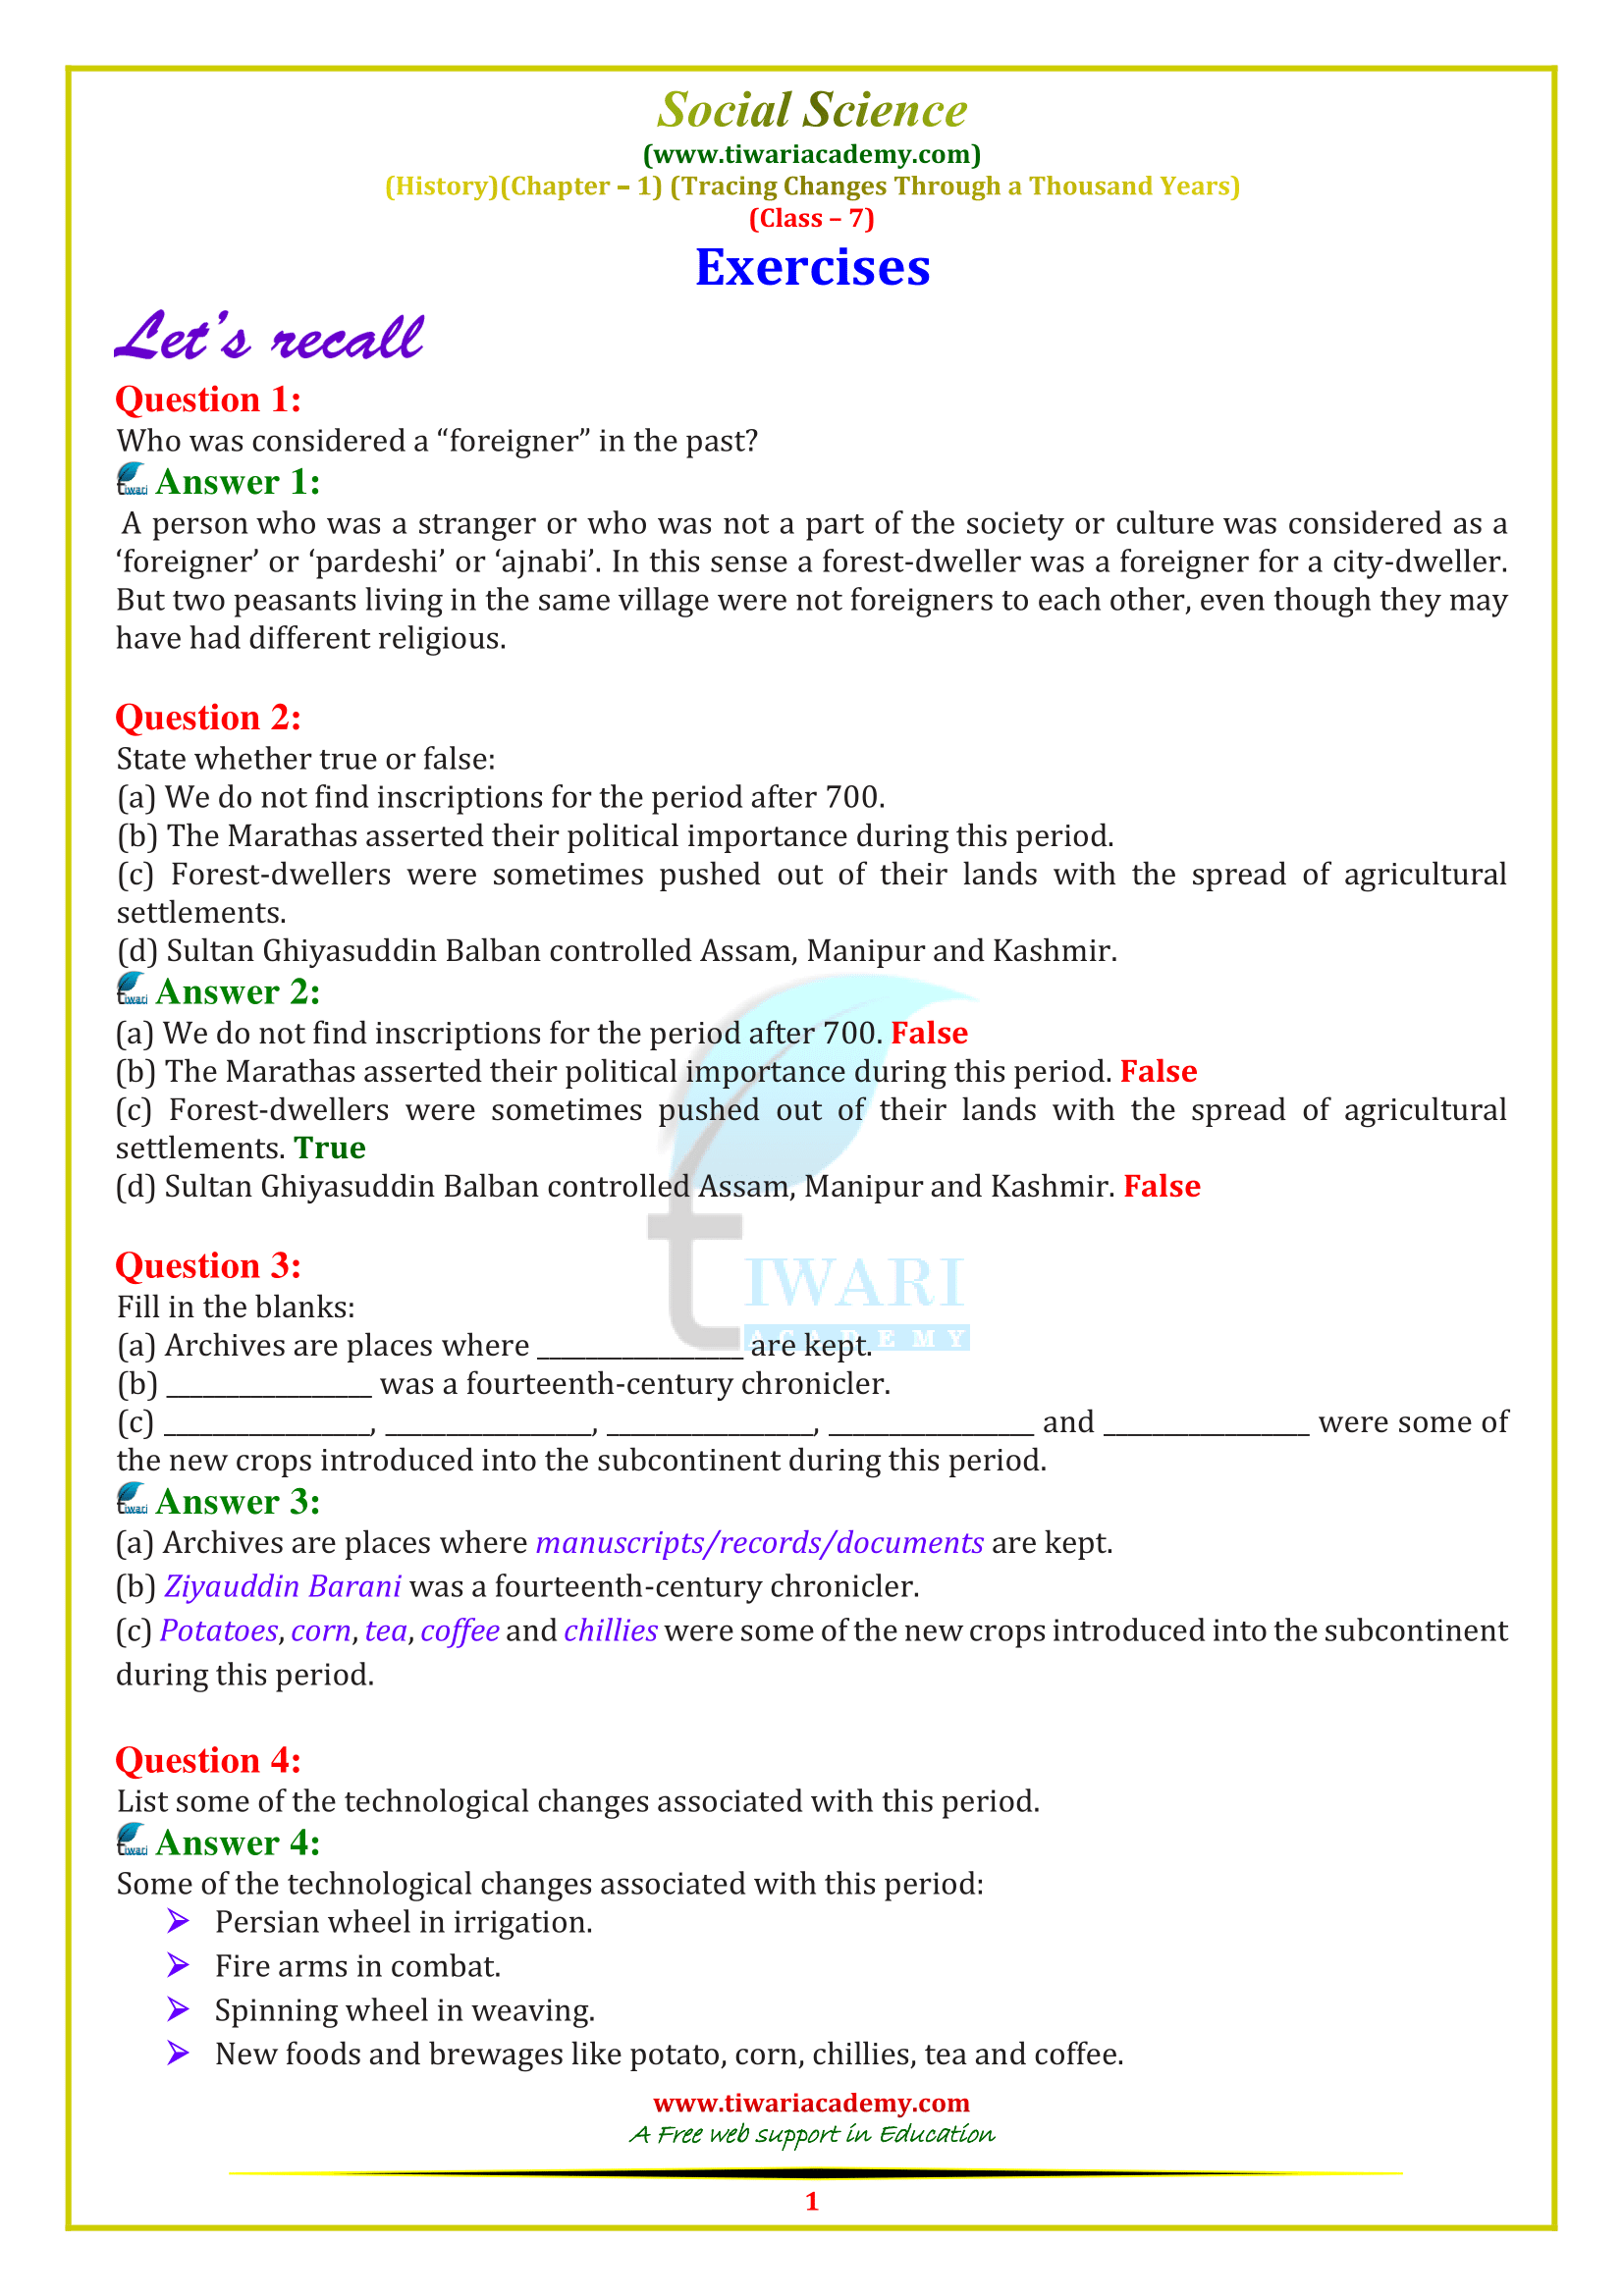 NCERT Solutions for Class 7 Social Science History Chapter 1 Tracing Changes Through a Thousand Years